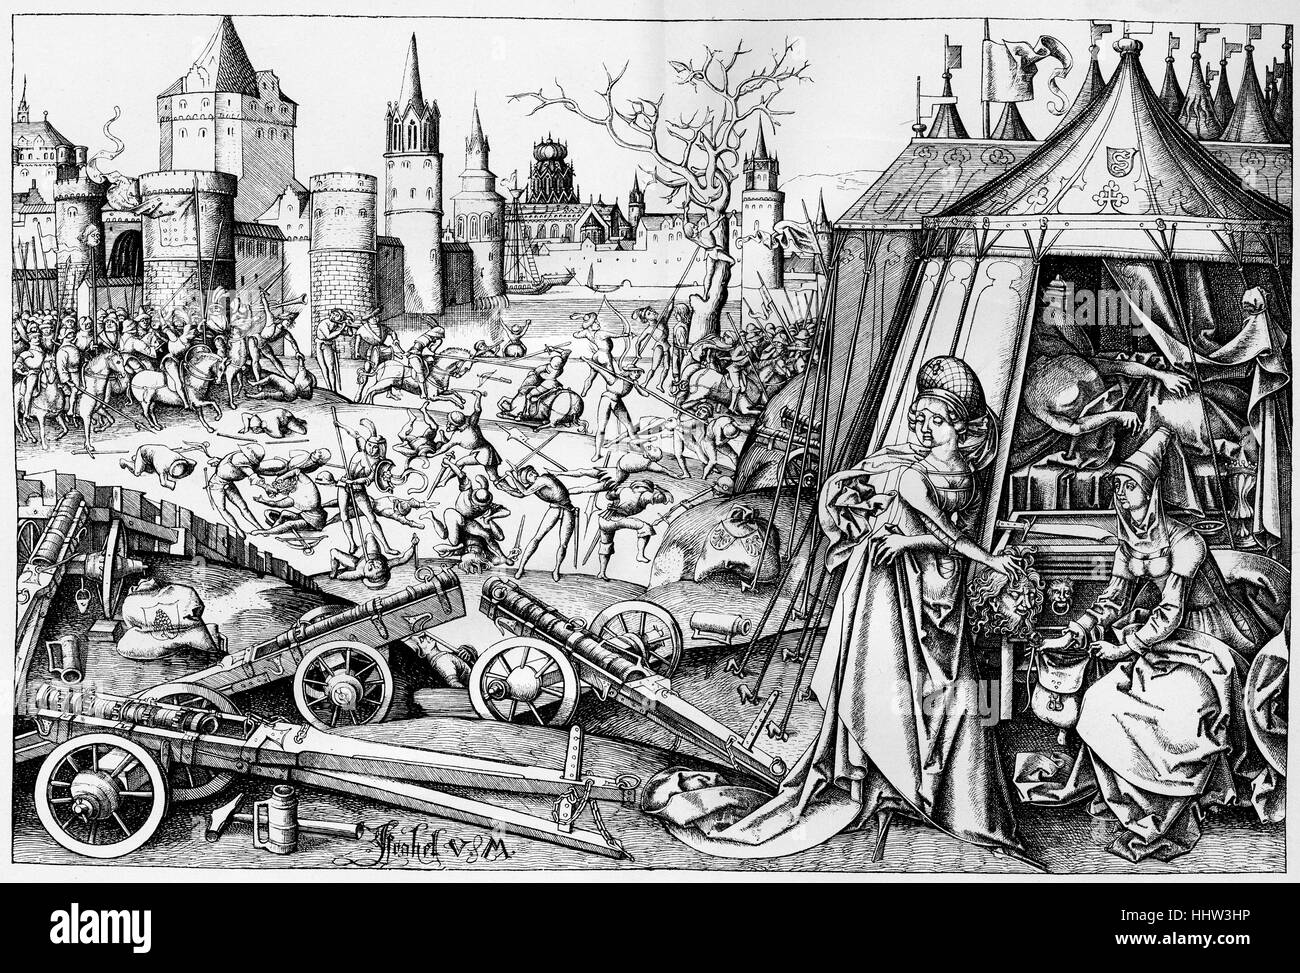 Judith with the head of Holofernes in his tent, battle for the city of Bethulia in the background. 15th century copper engraving by Israhel van Meckenem (1445 - 1503) Stock Photo